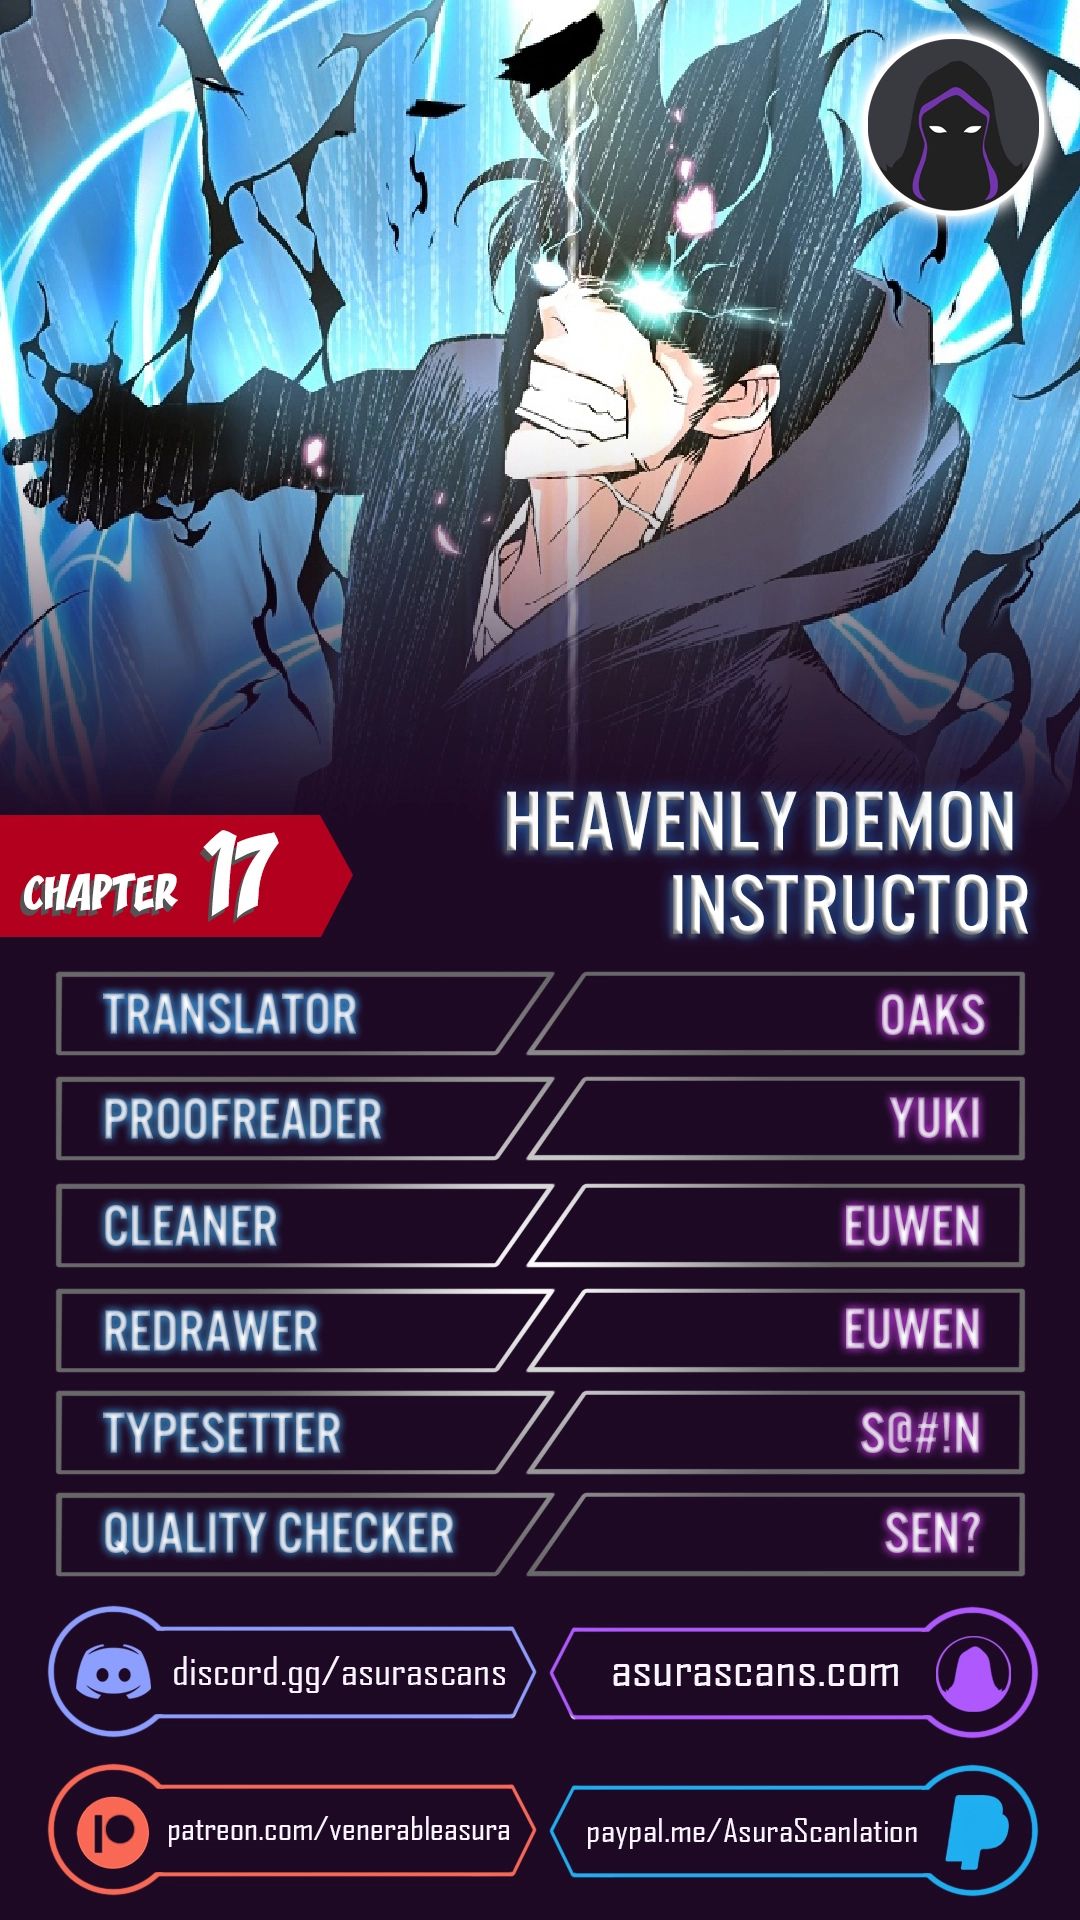 Heavenly Demon Instructor chapter 17